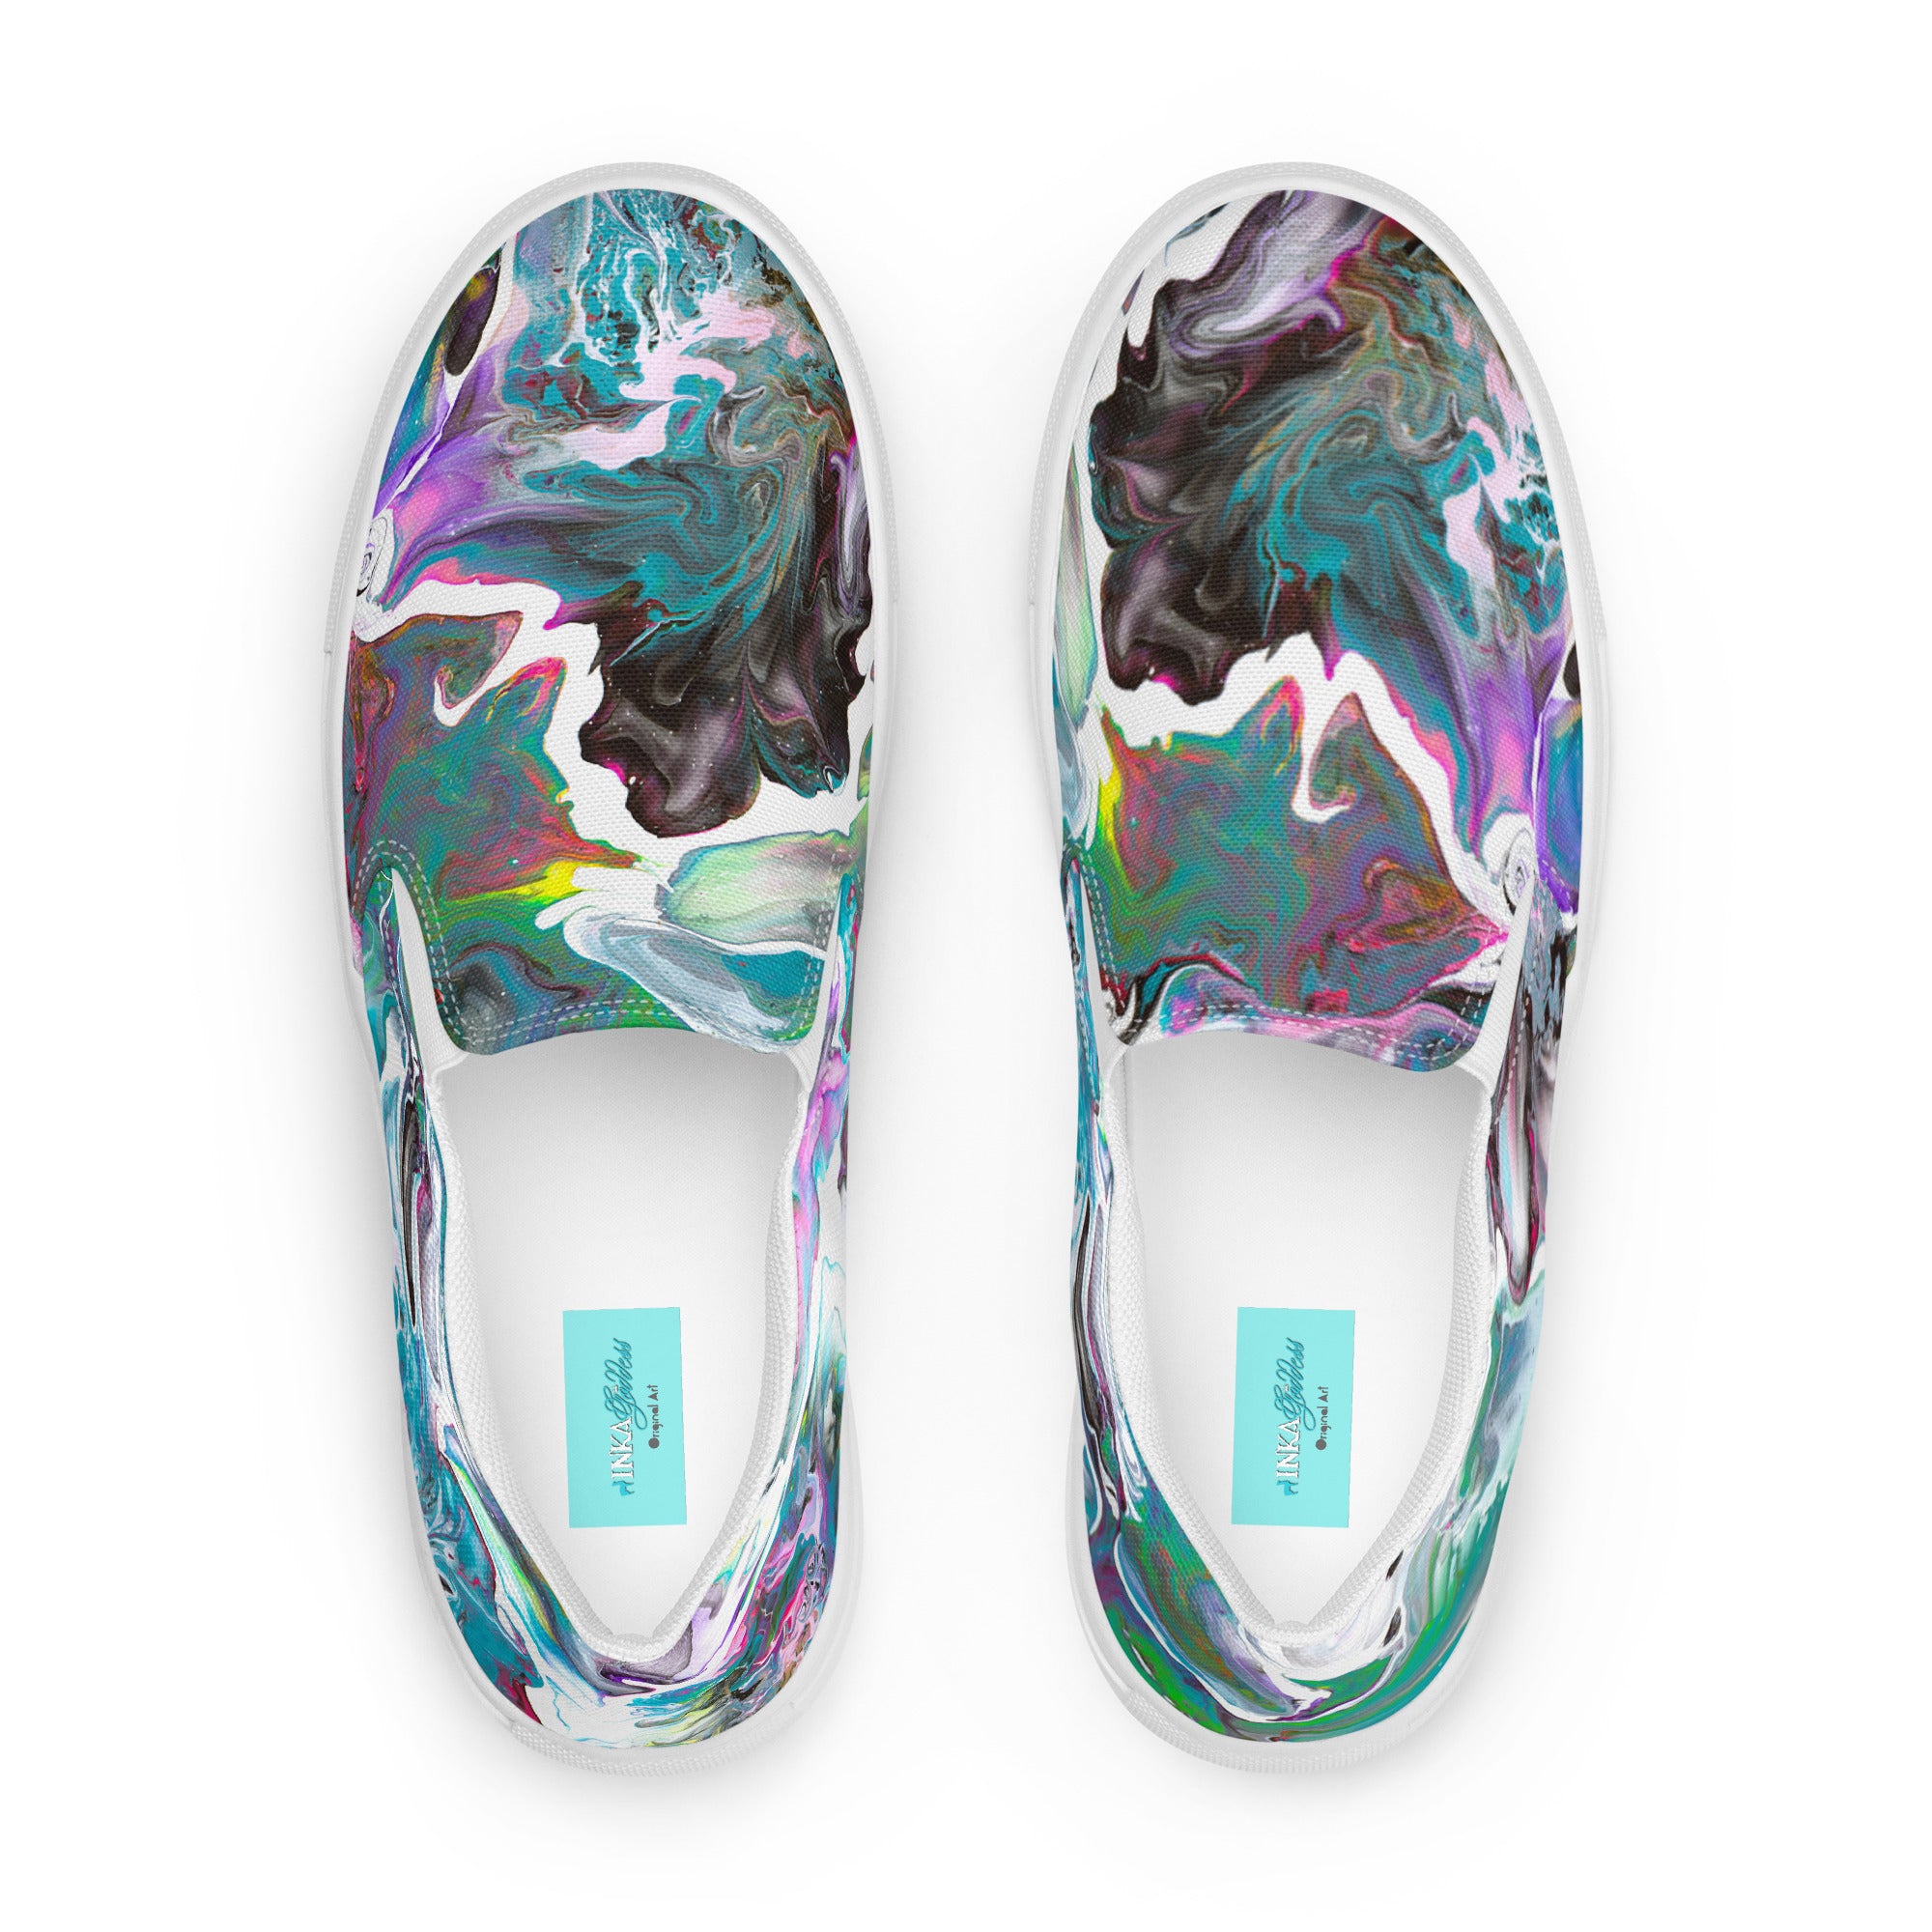 "Northern Lights" Women’s Slip-on Canvas Shoes